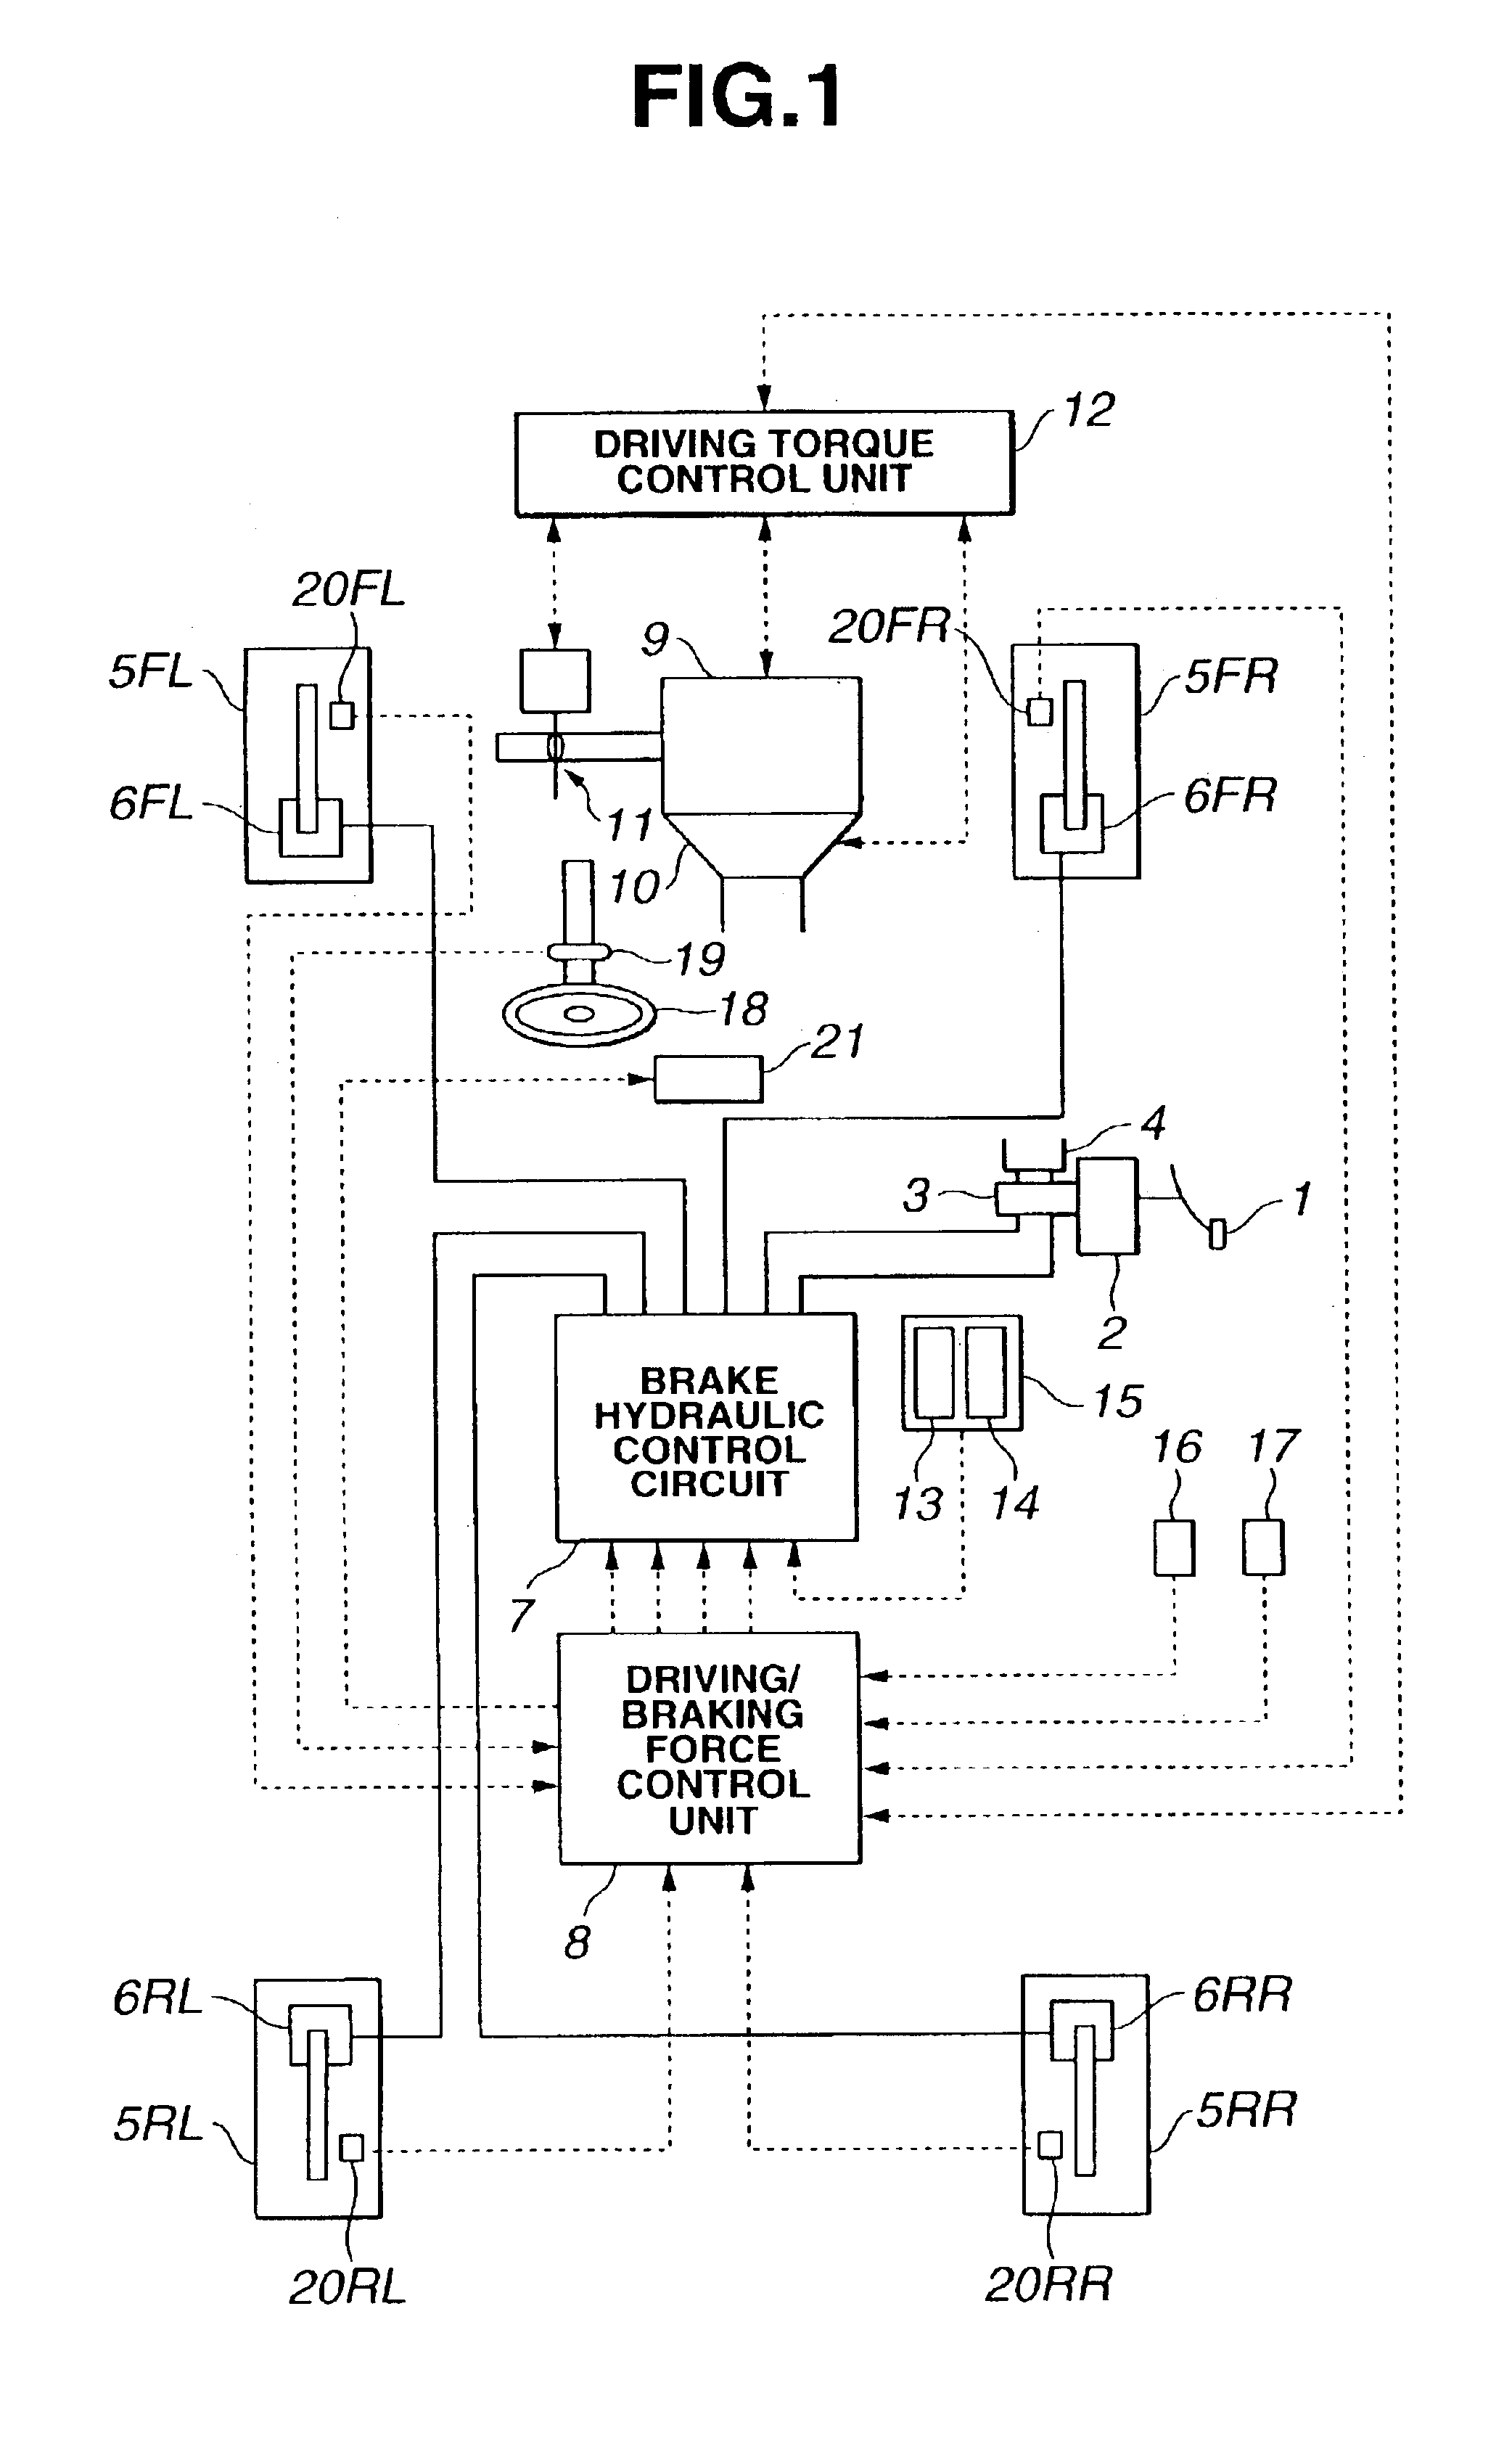 Travel control system for vehicle